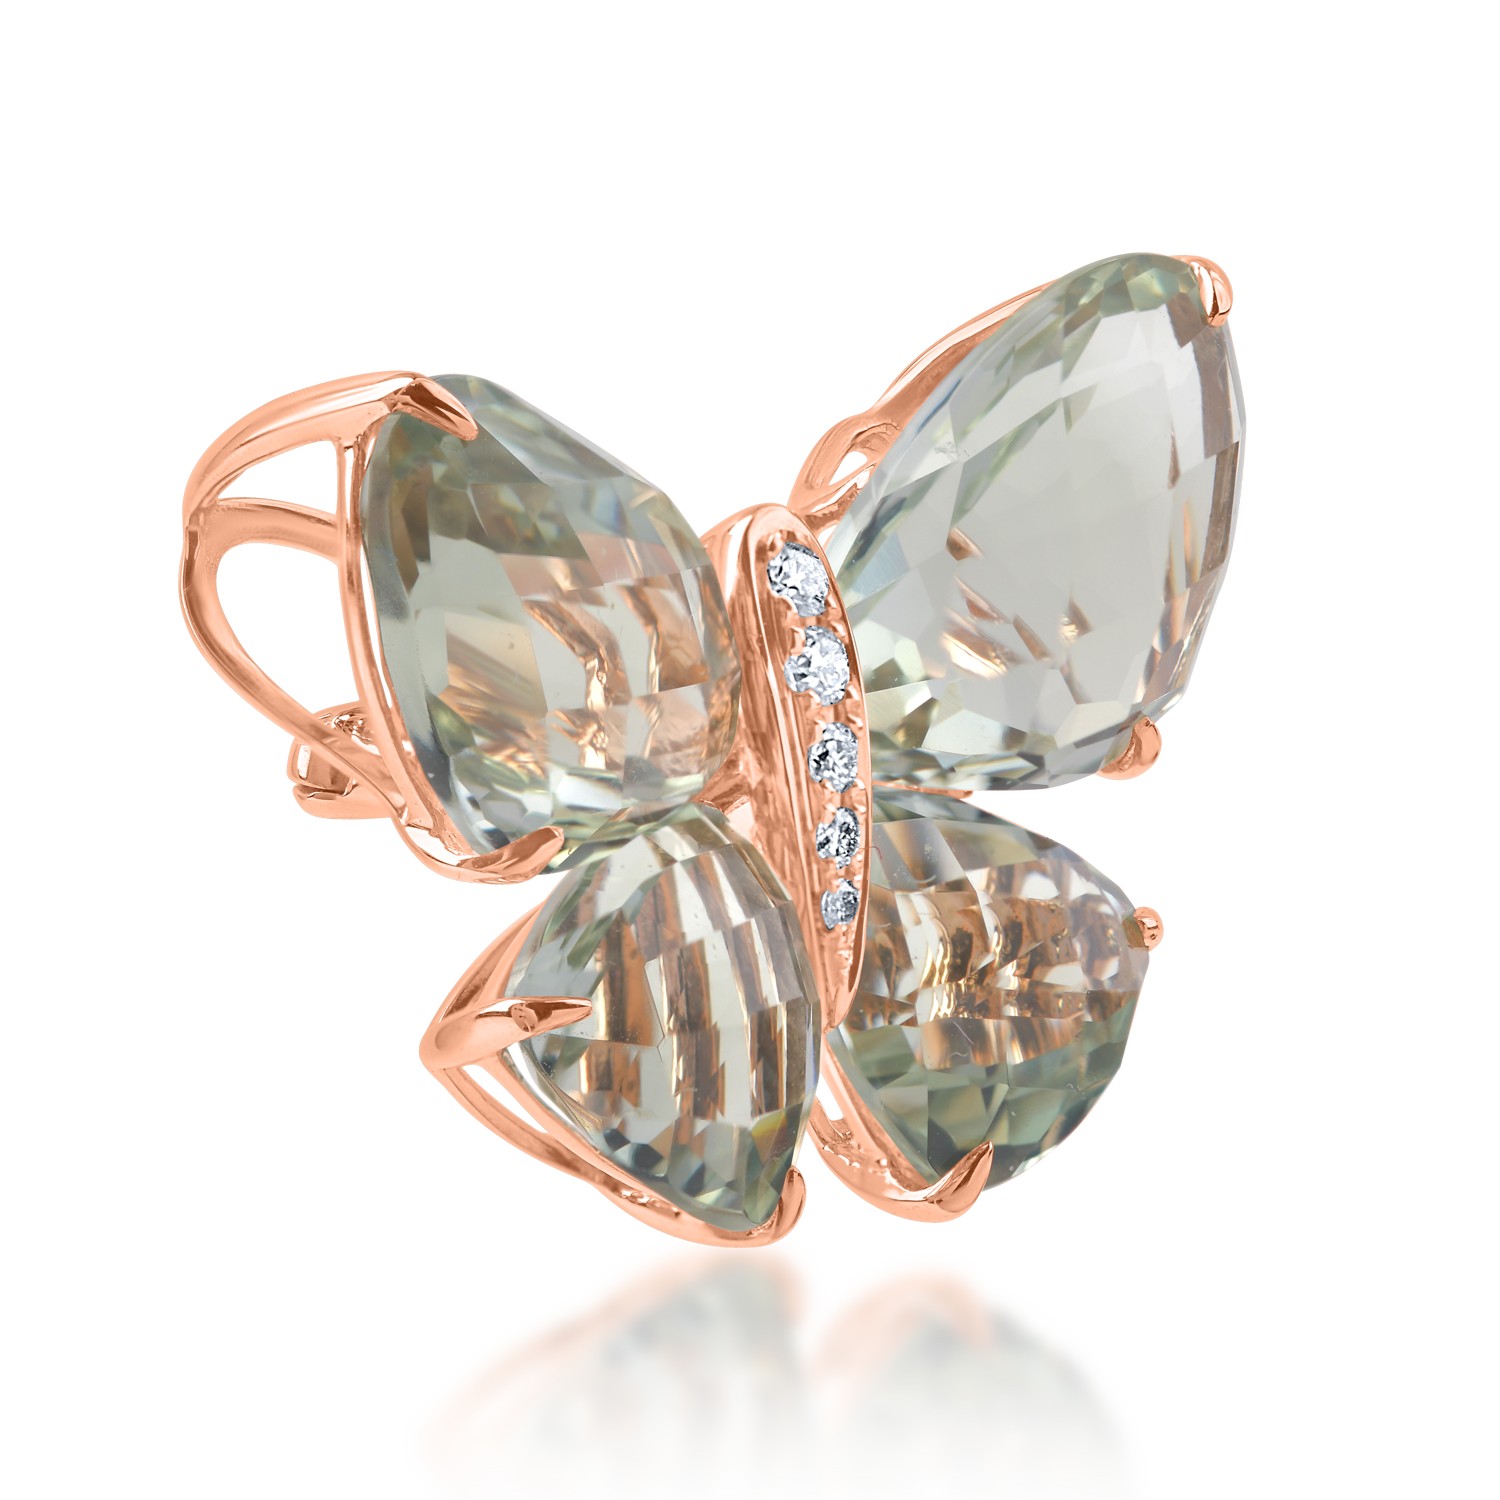 Rose gold butterfly pendant with 11.67 ct precious and semi-precious stones